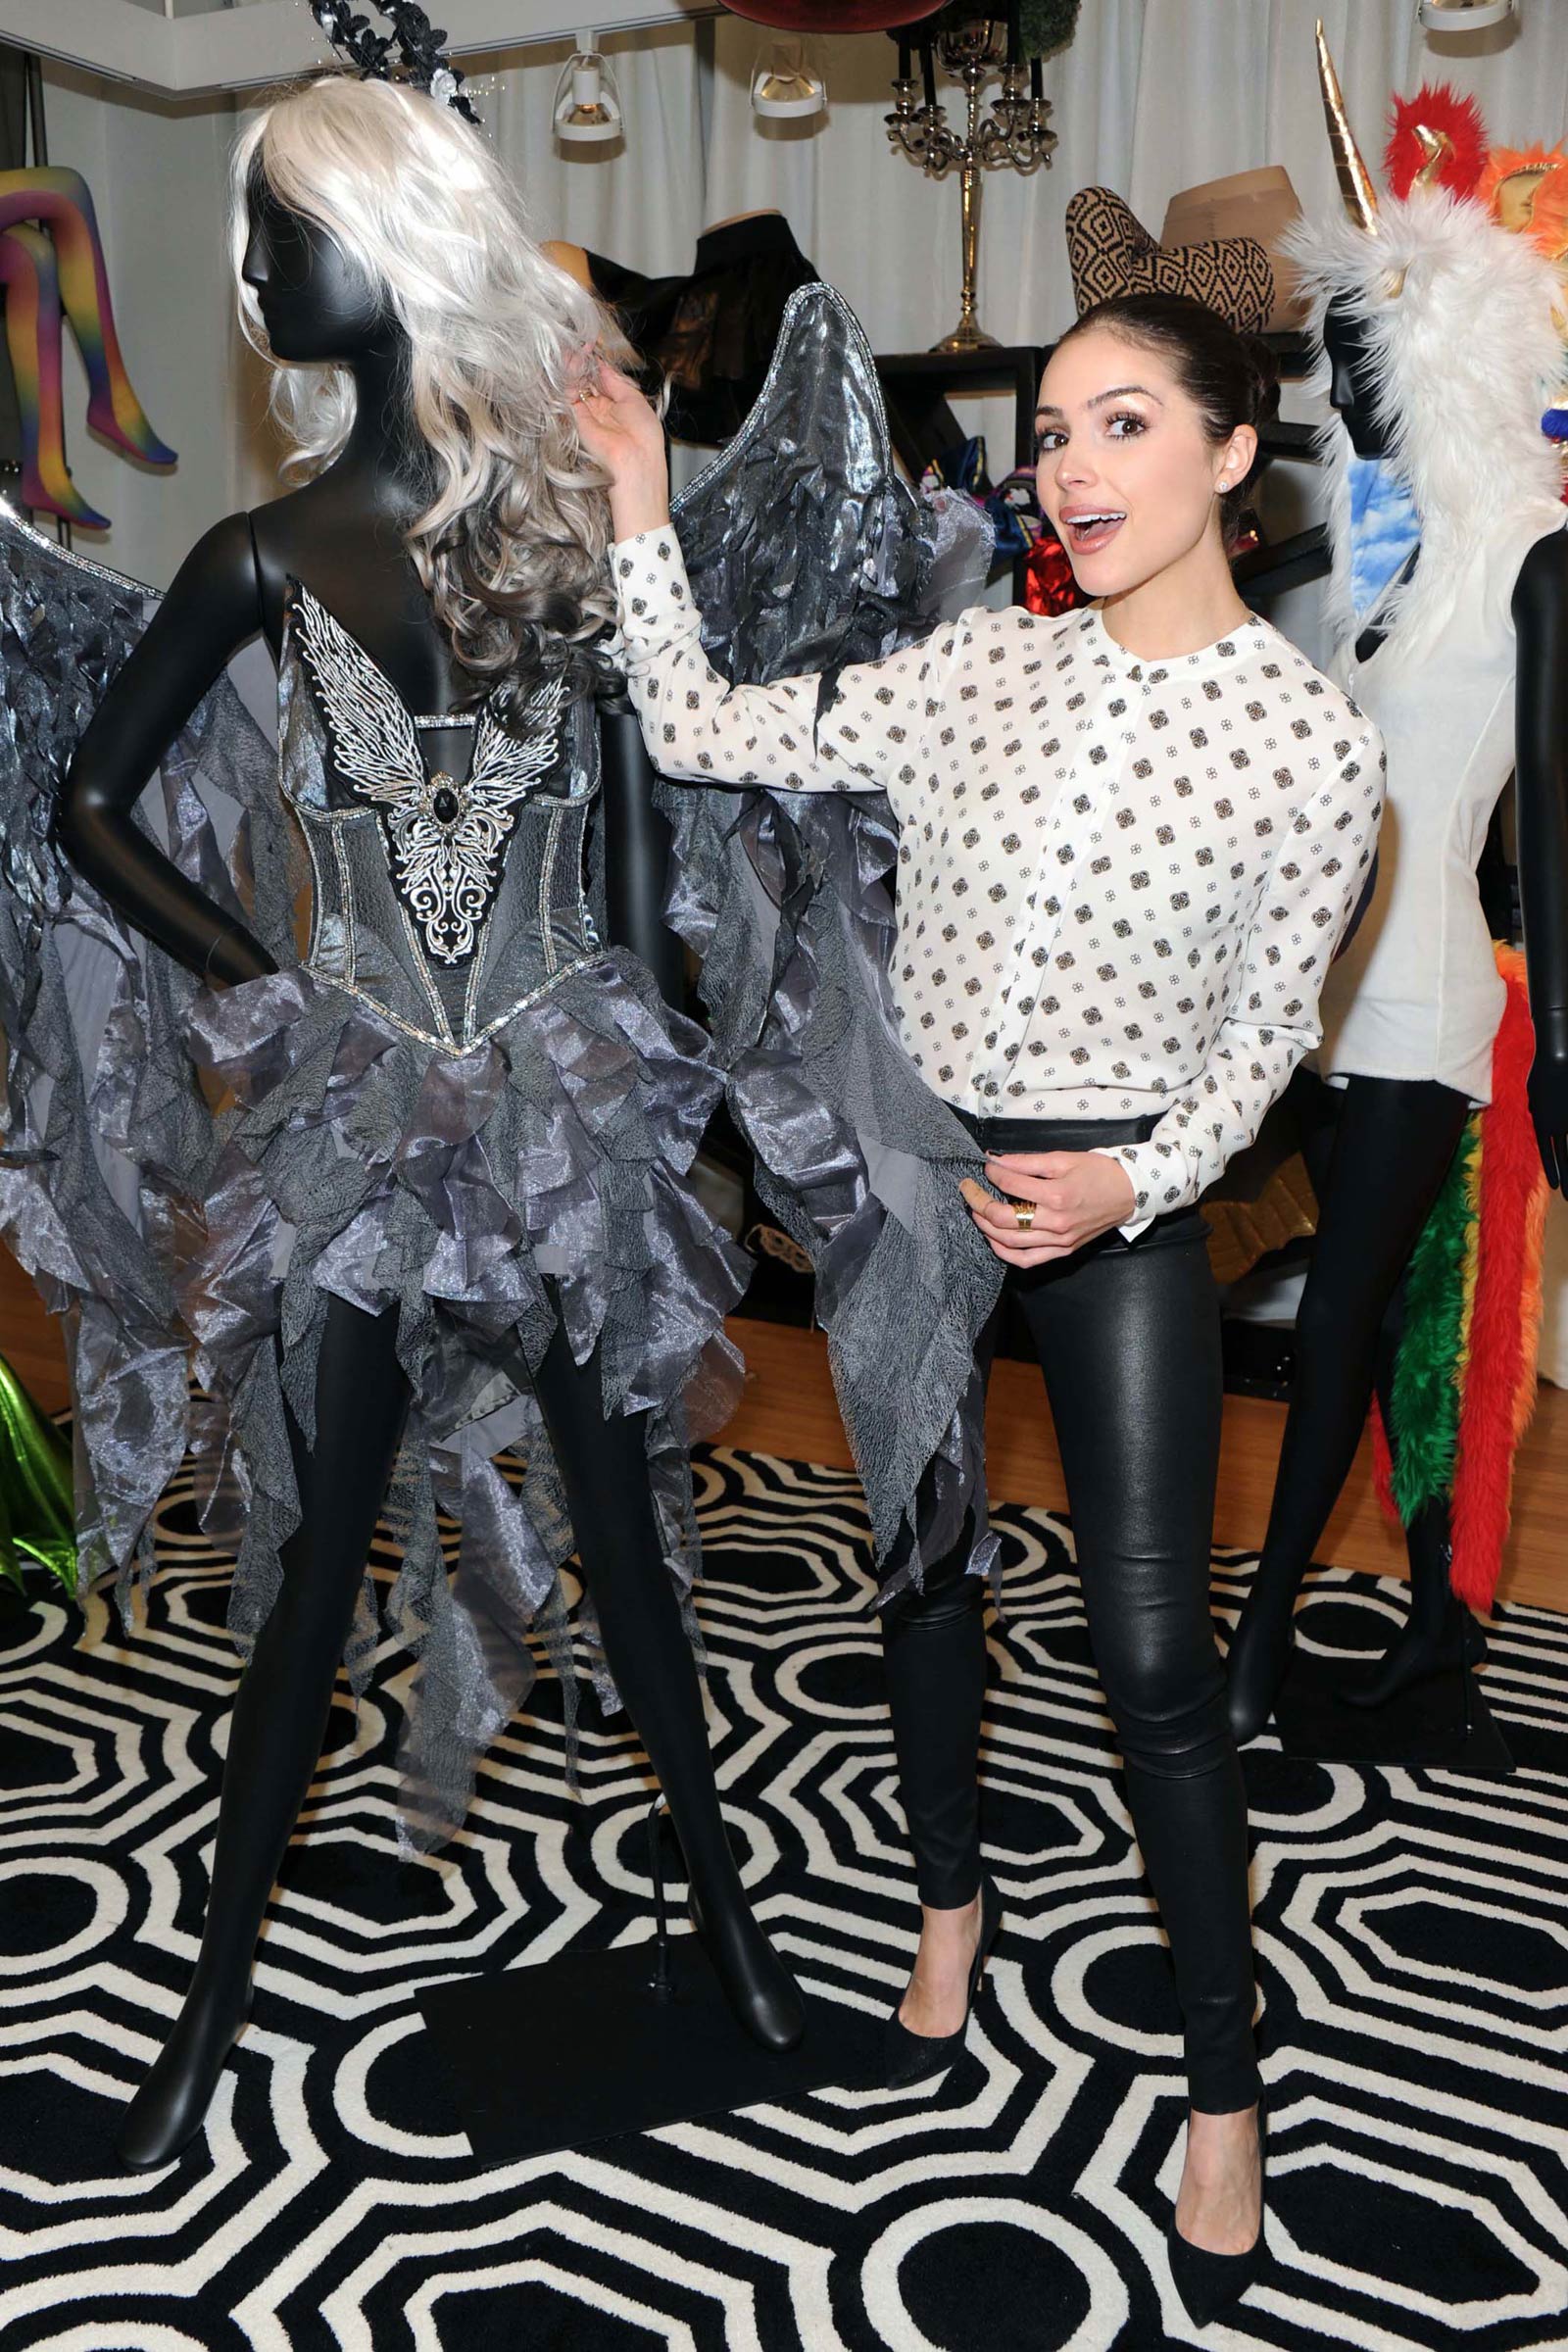 Olivia Culpo visits the Yandy Showroom for her Halloween Costume